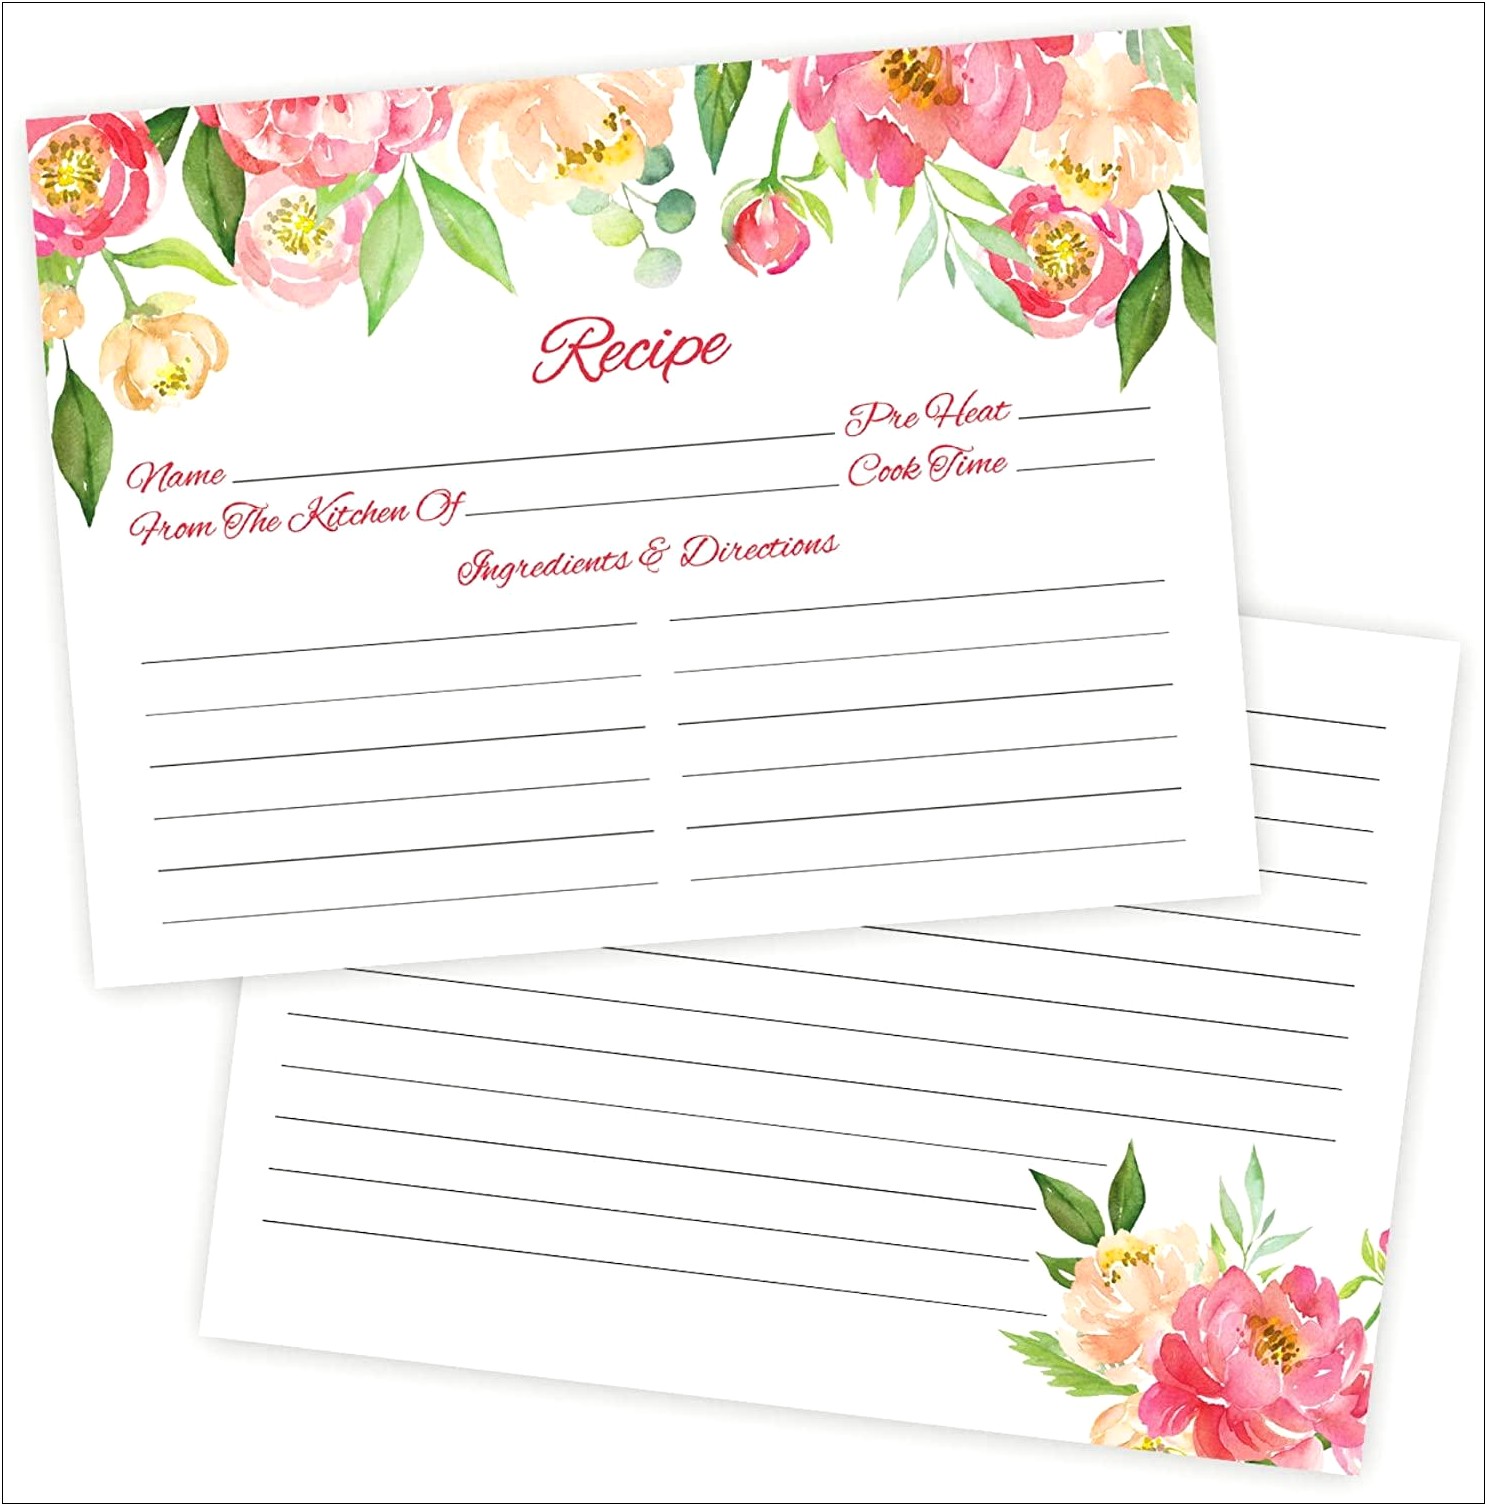 Free Recipe Card Templates For Bridal Shower